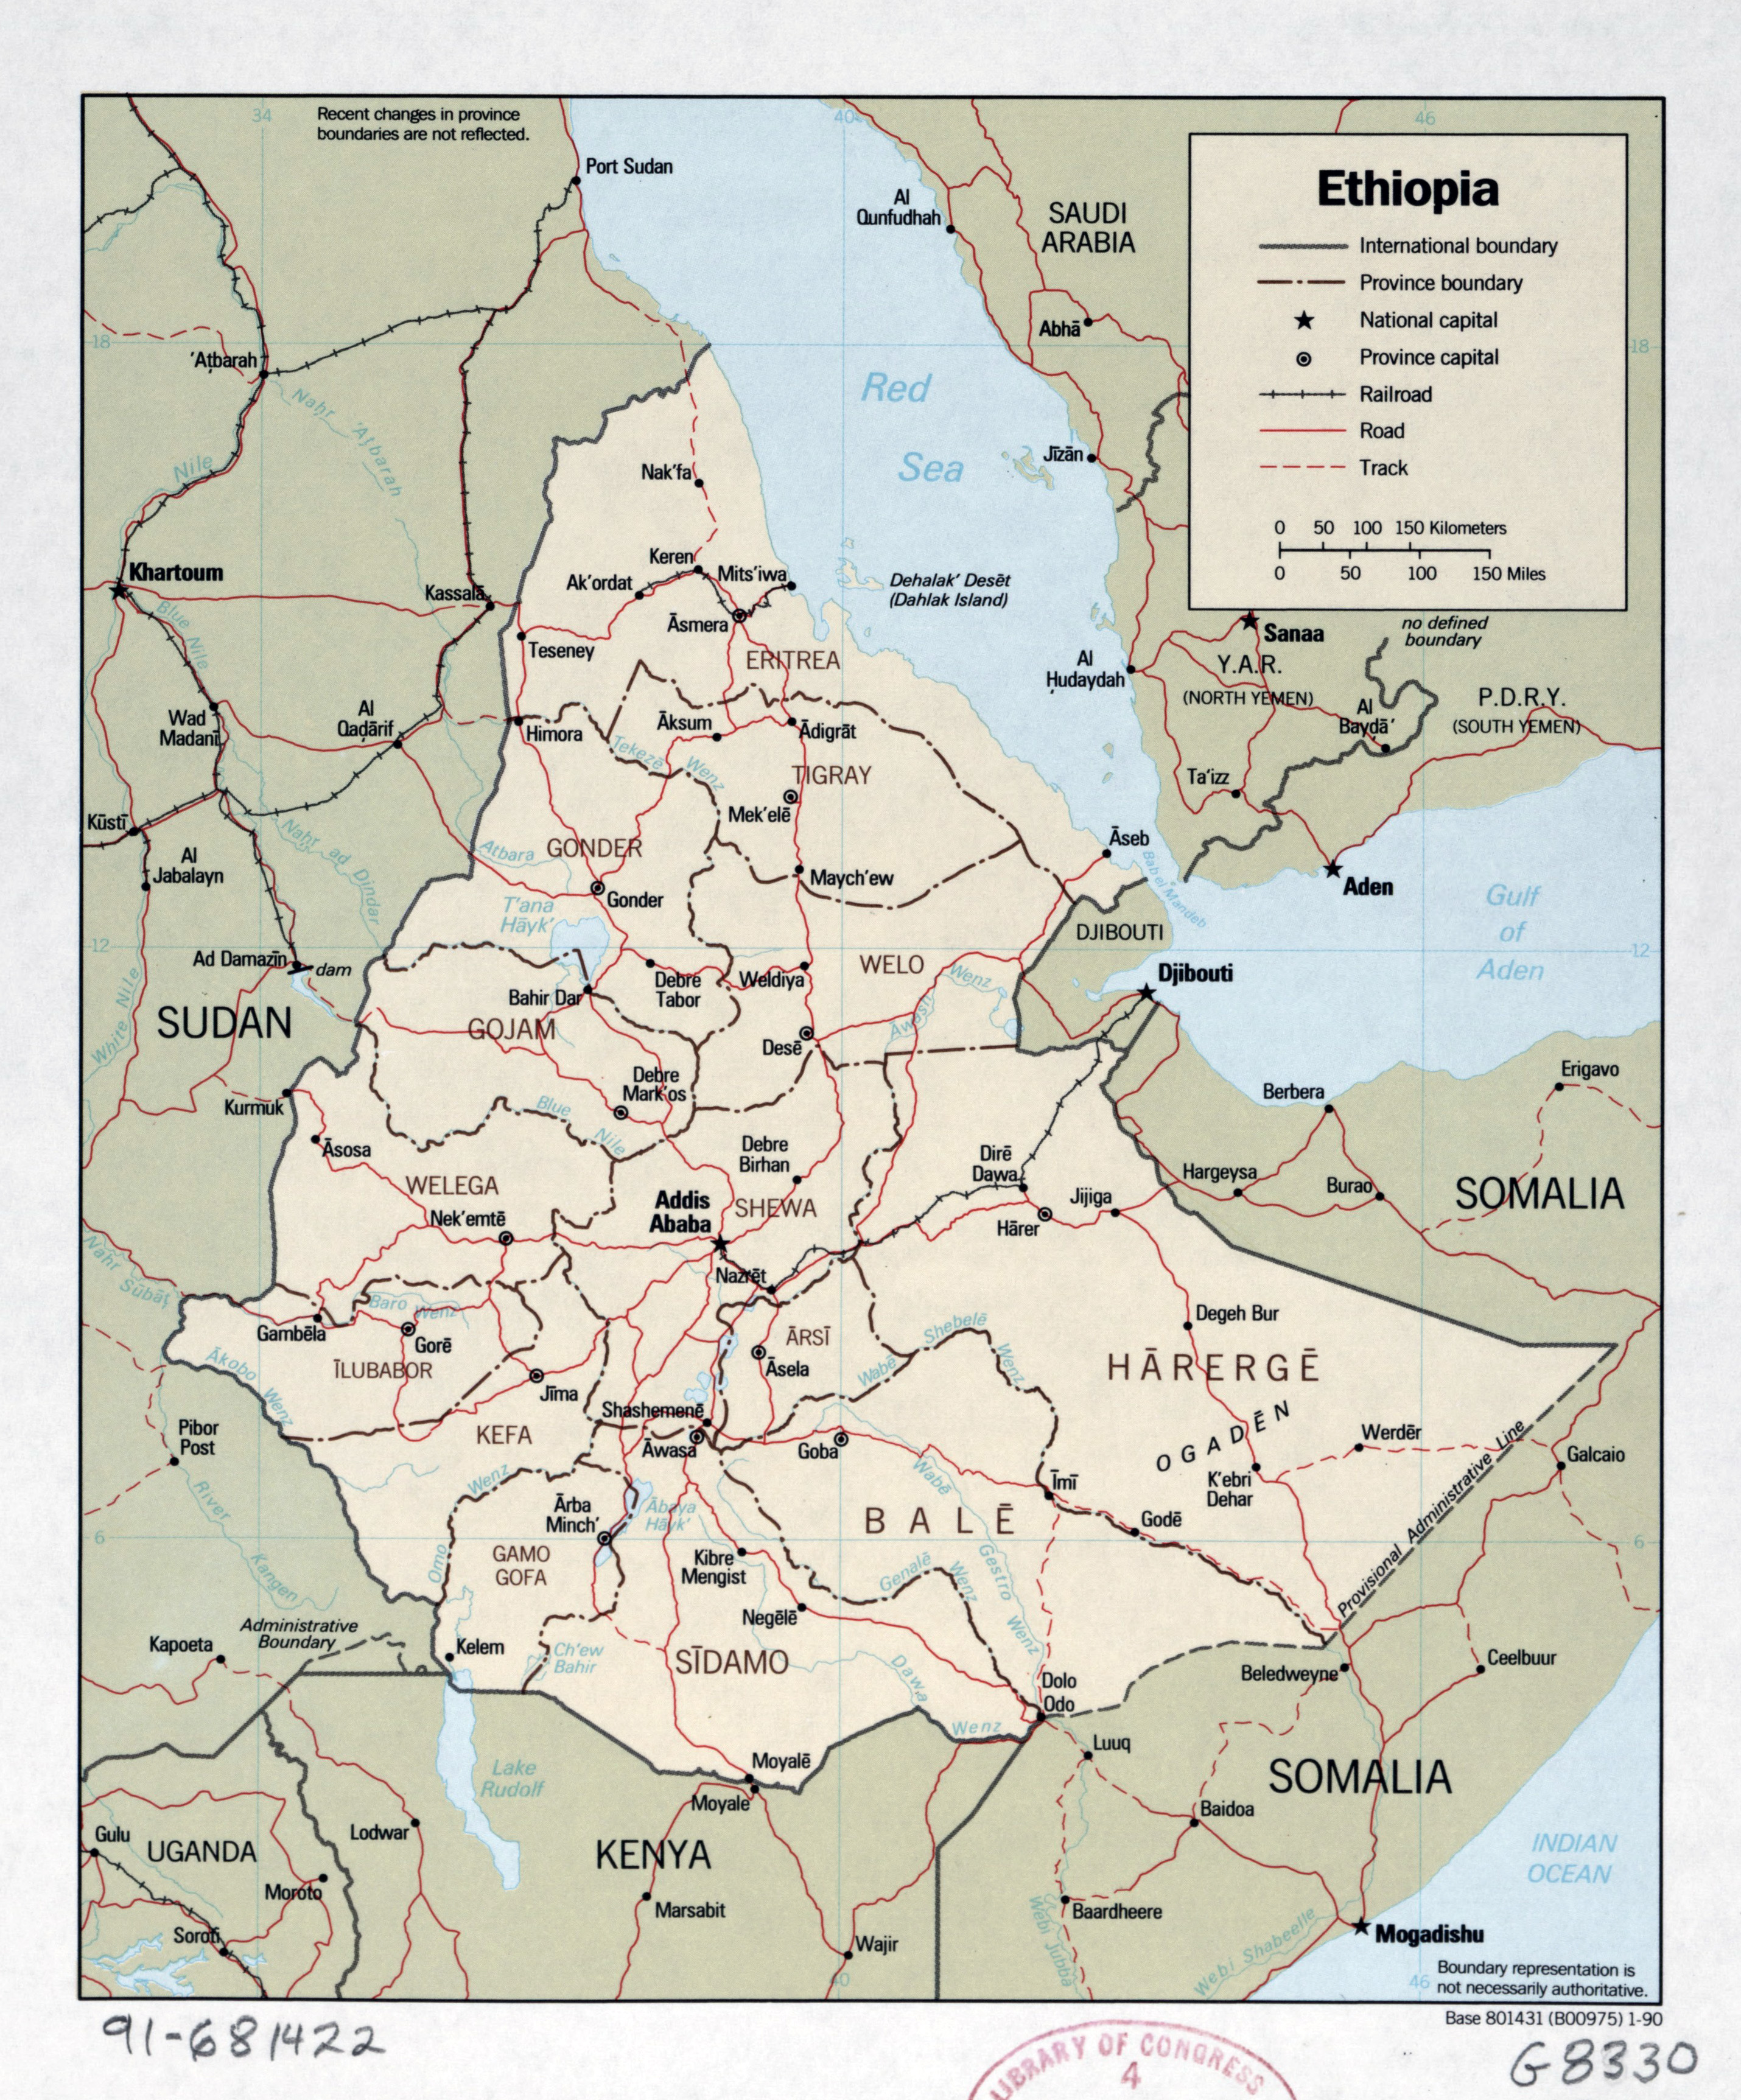 Large Detailed Political And Administrative Map Of Ethiopia With Roads Railroads And Cities 1990 